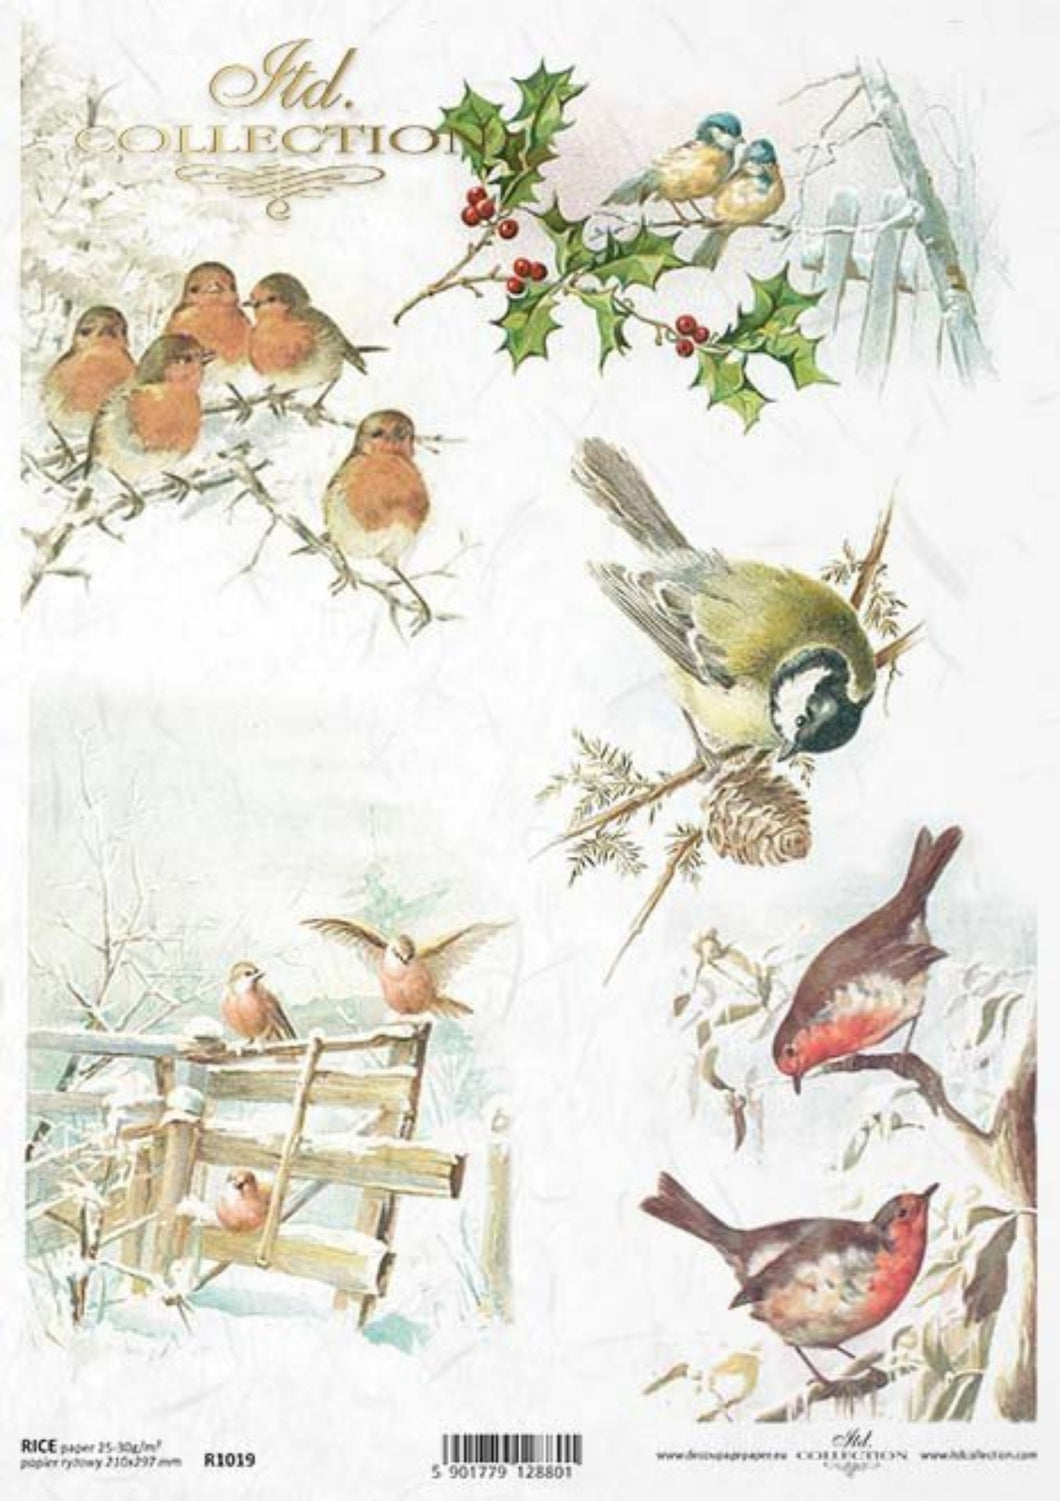 Snowy Winter Birds Rice Paper by ITD Collection, R1019, A4